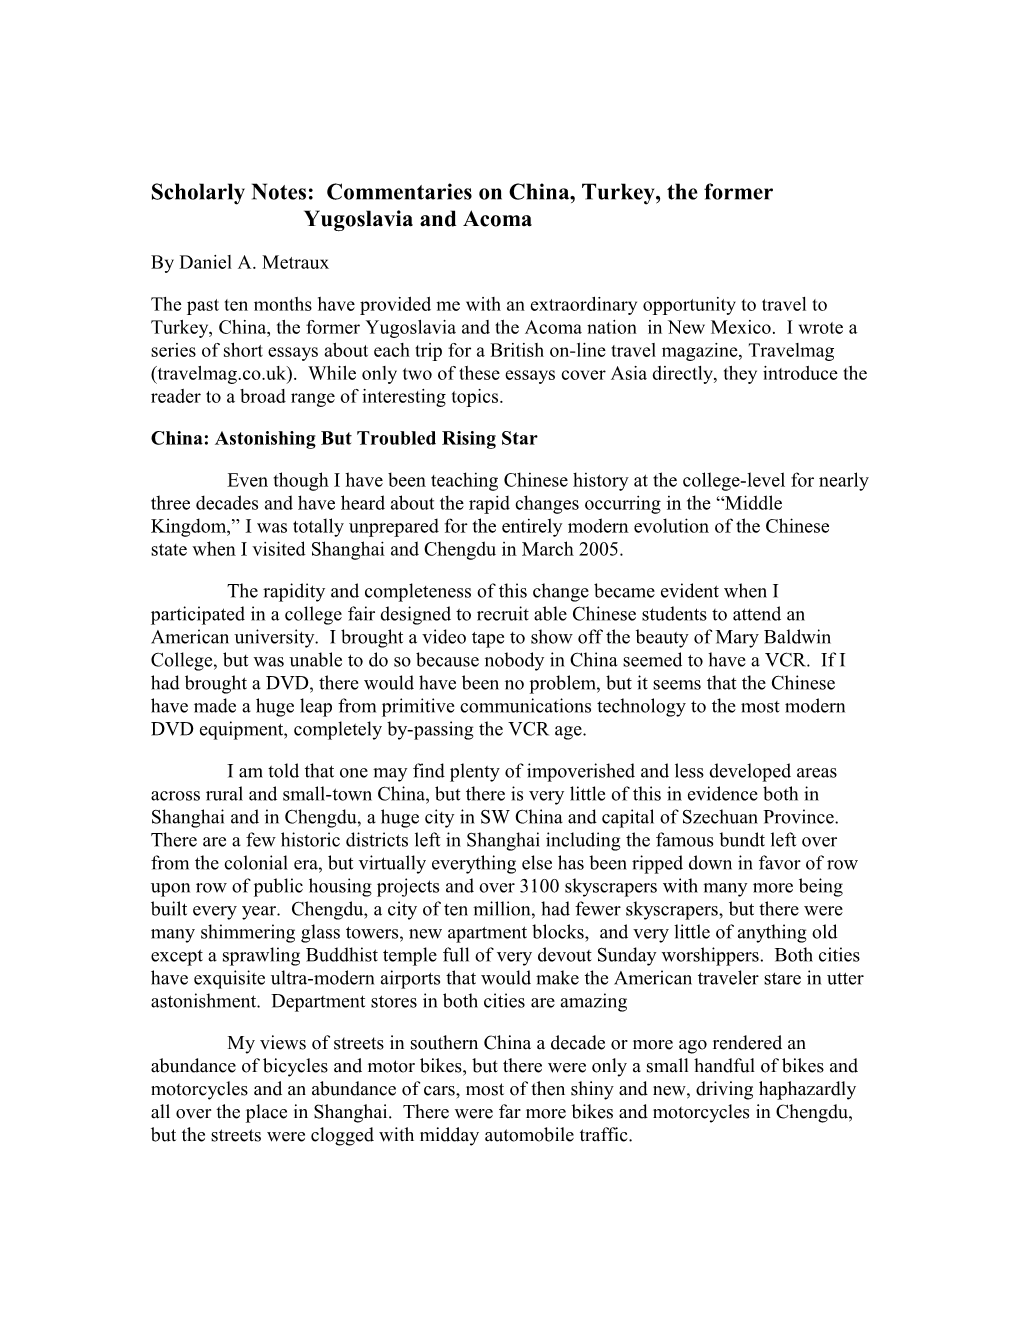 Scholarly Notes: Commentaries on China, Turkey, the Former